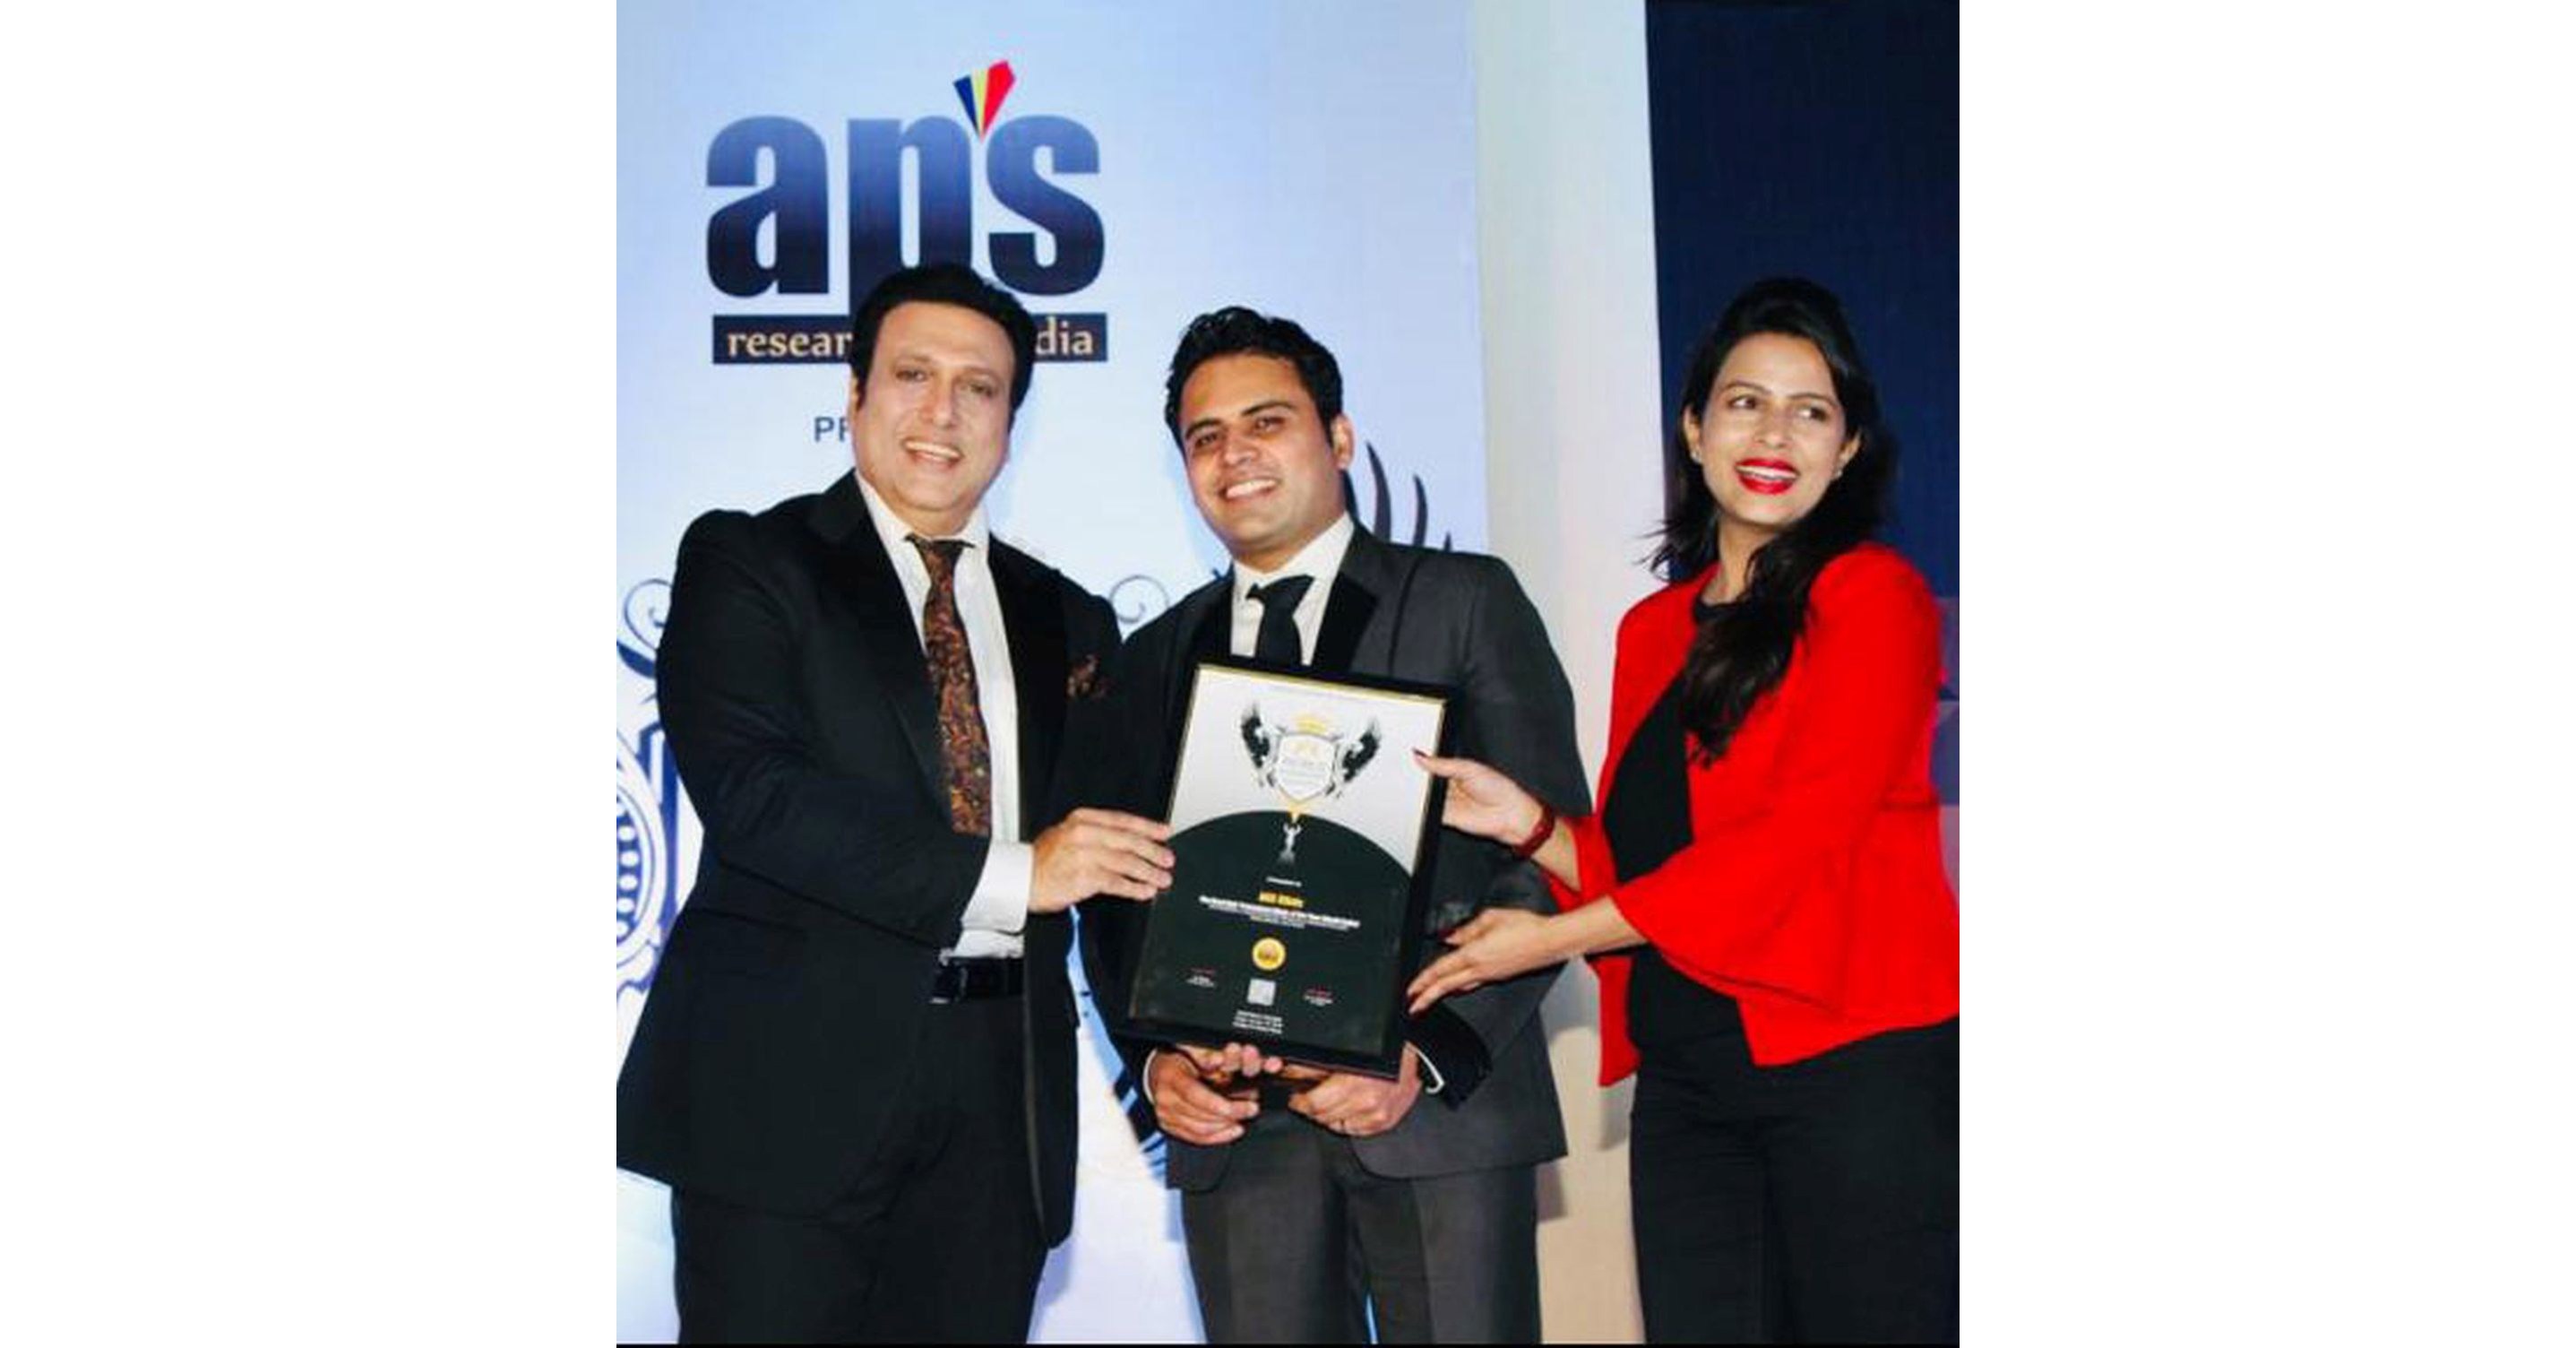 AKS Clinic Awarded Best Hair Transplant Clinic of the Year, North India